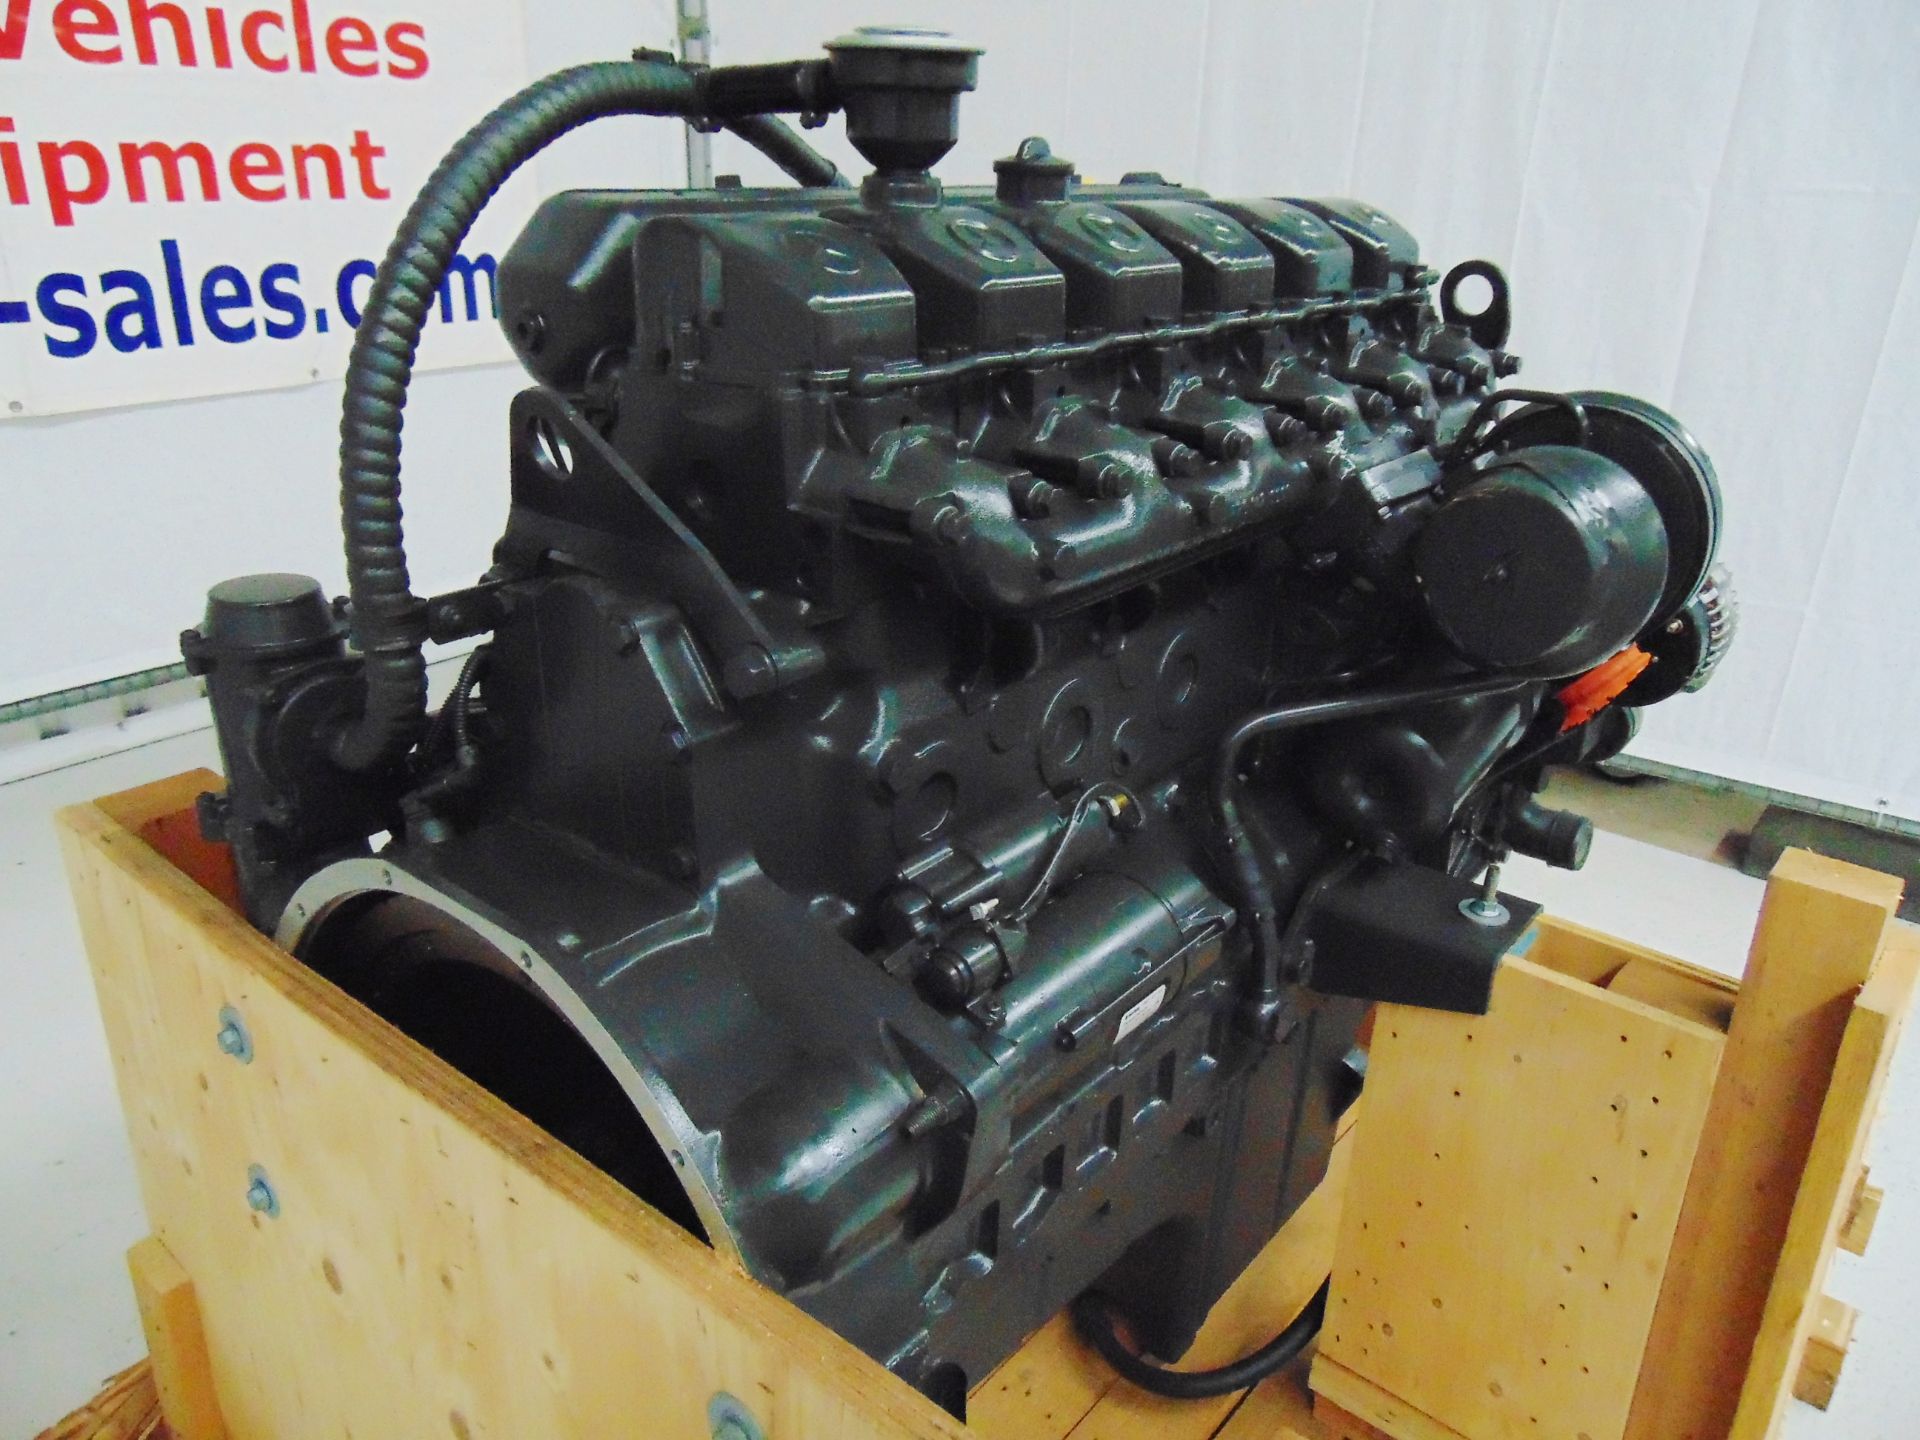 Factory Reconditioned Mercedes-Benz OM457LA Turbo Diesel Engine - Image 10 of 23